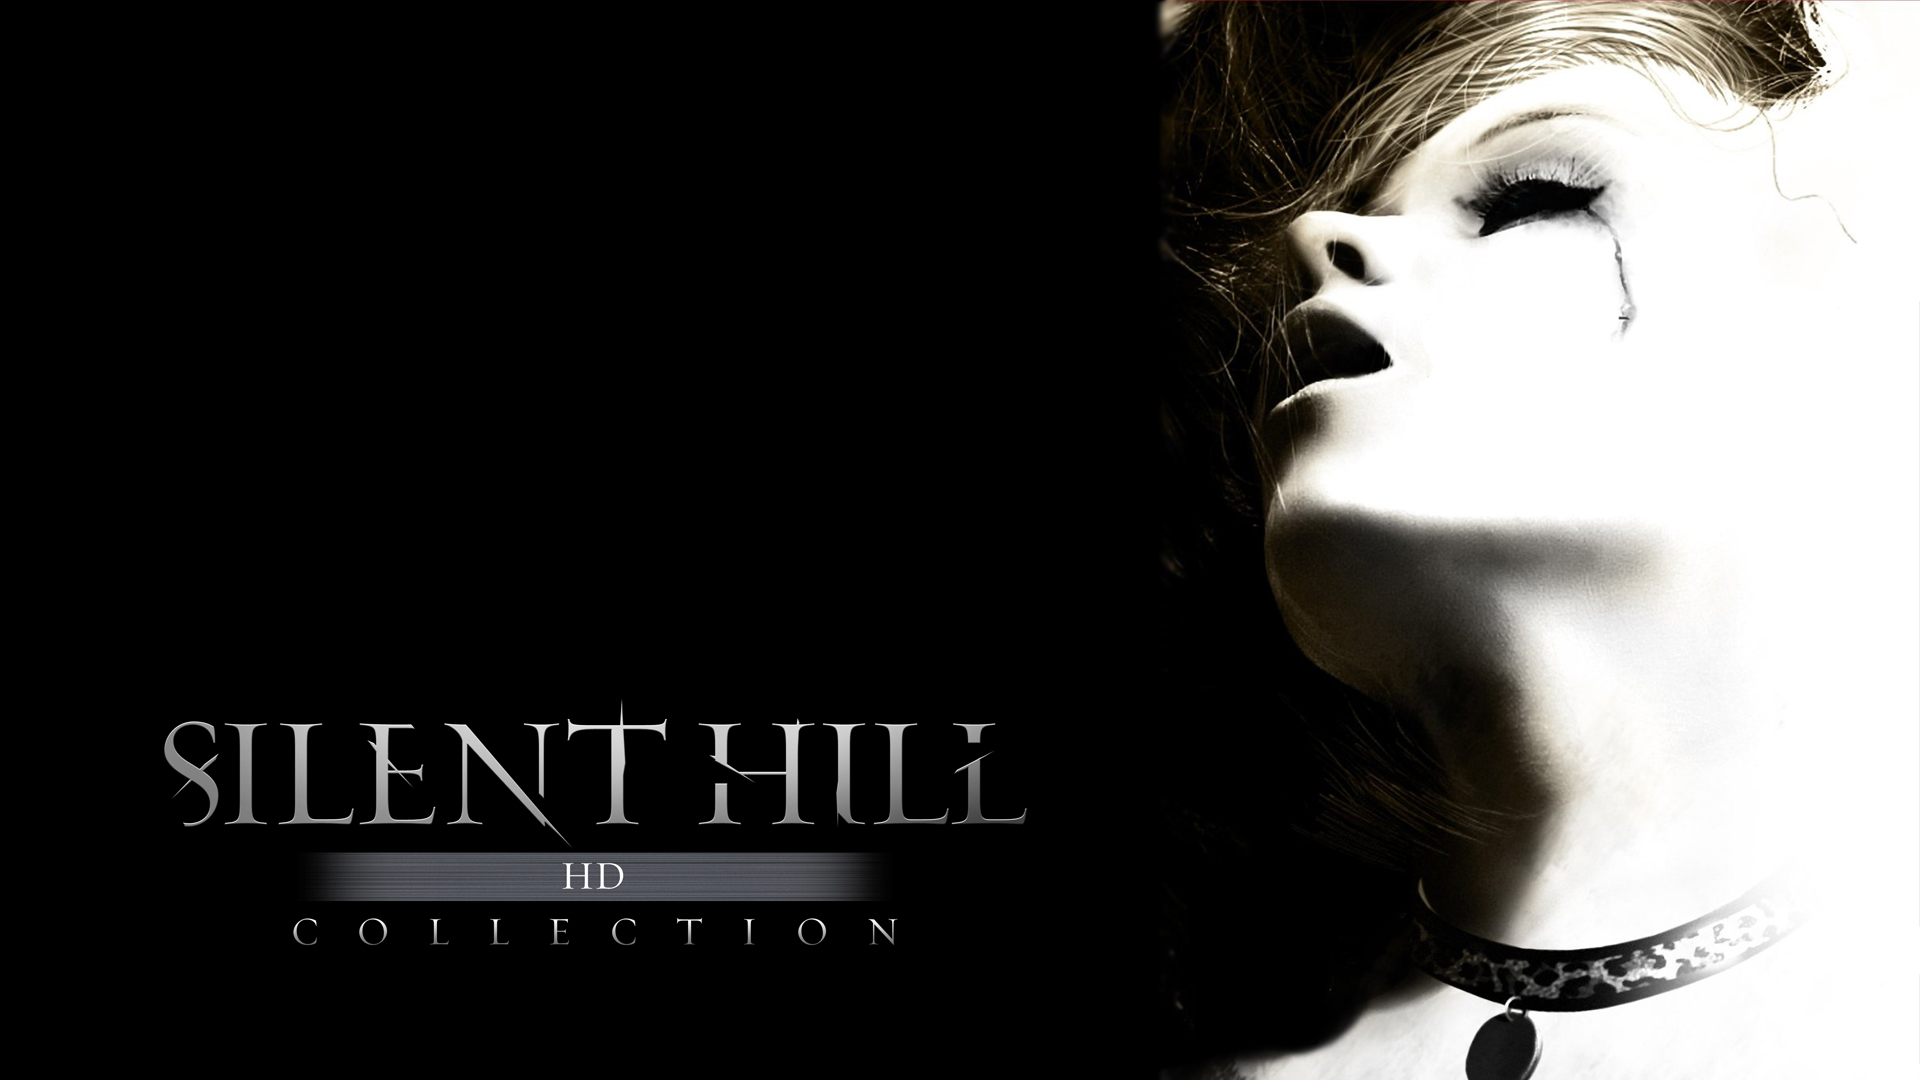 Silent Hill HD Collection Wallpaper